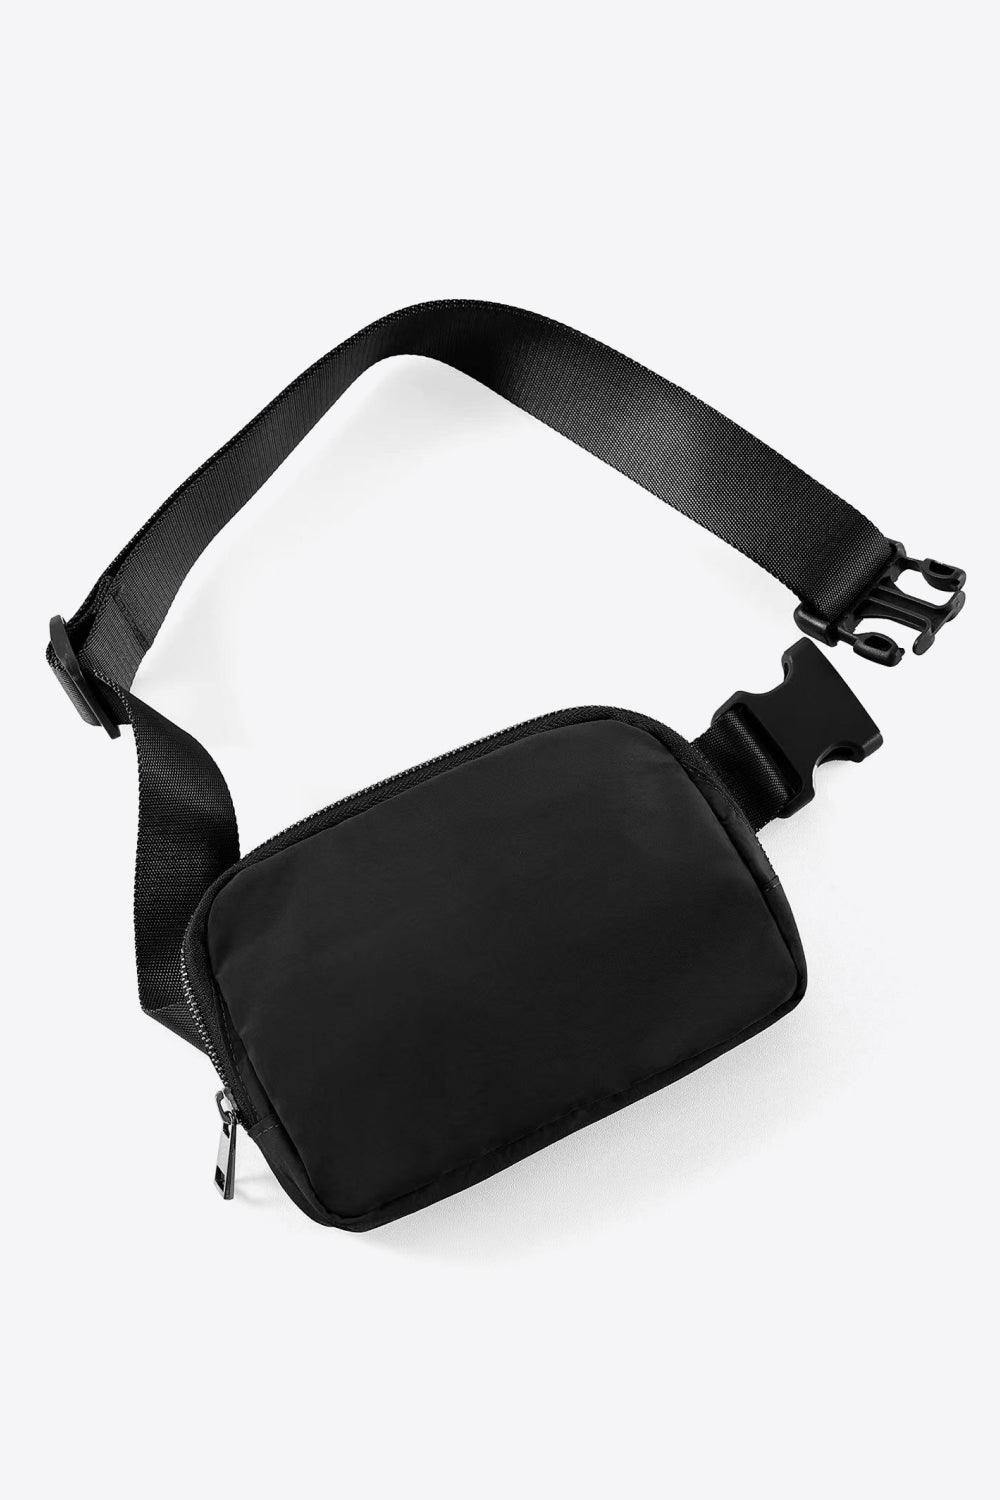 Buckle Zip Closure Fanny Pack: Ultimate Convenience & Style – Jewelry Bubble